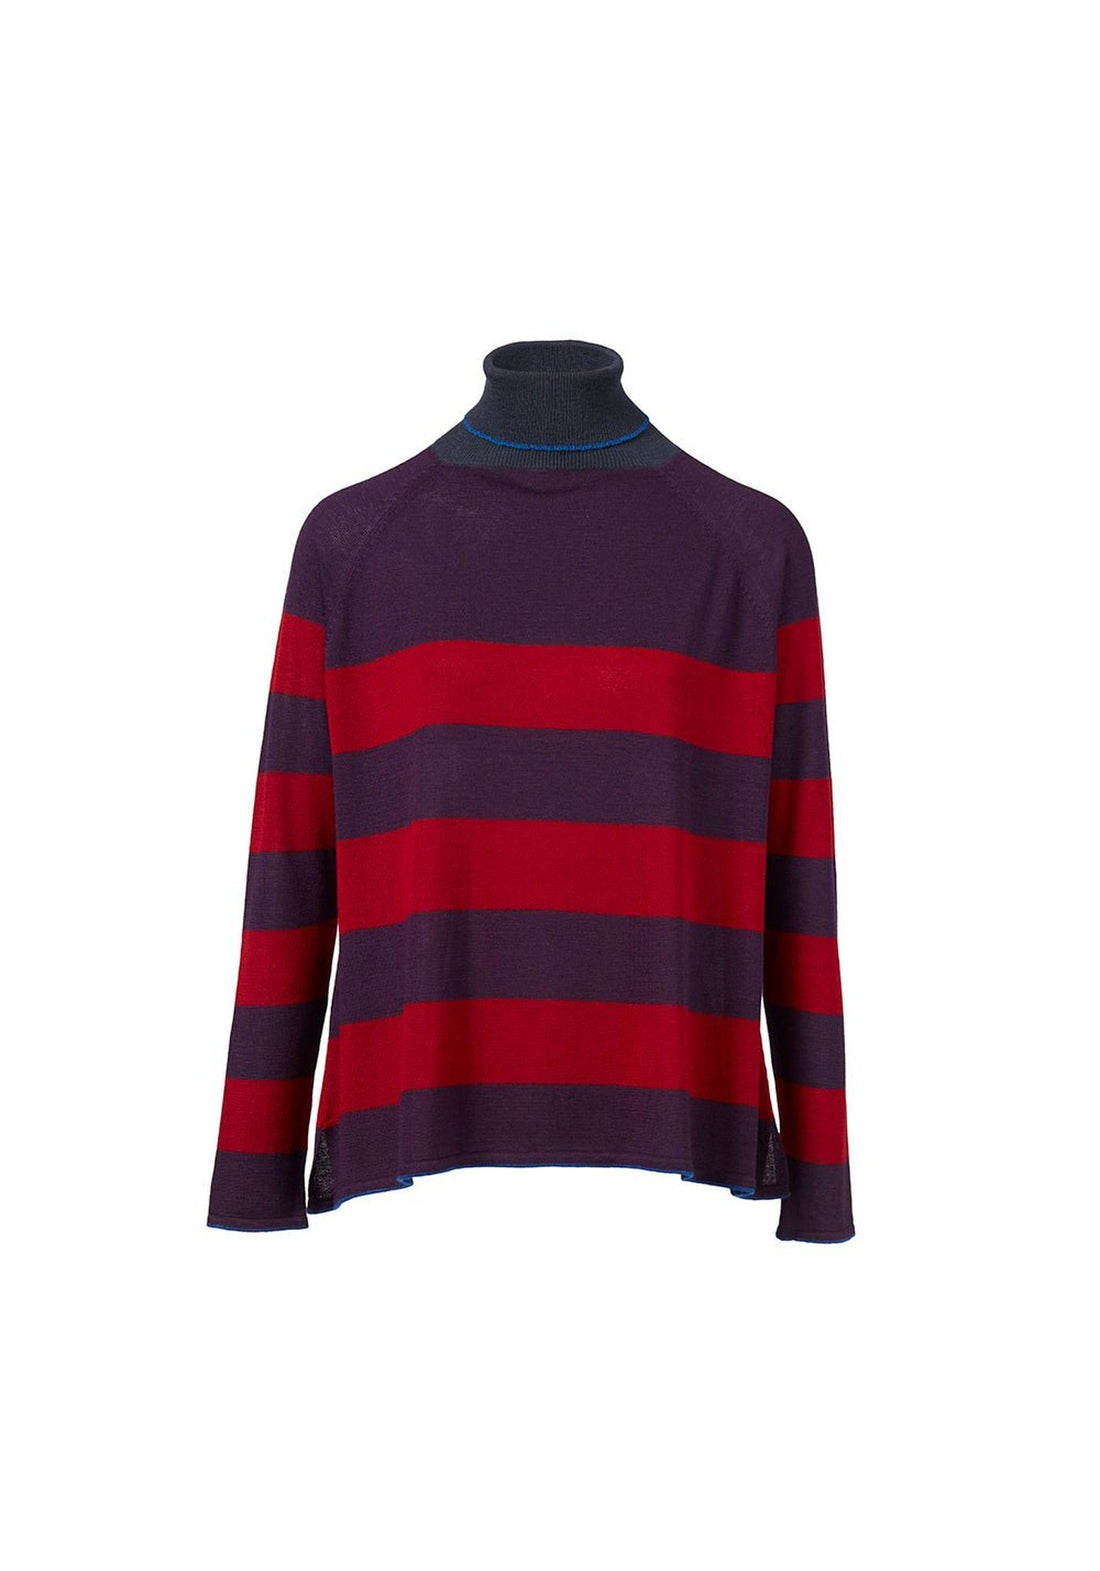 Top Key Turtle Neck Wide Stripes - Traces of Me